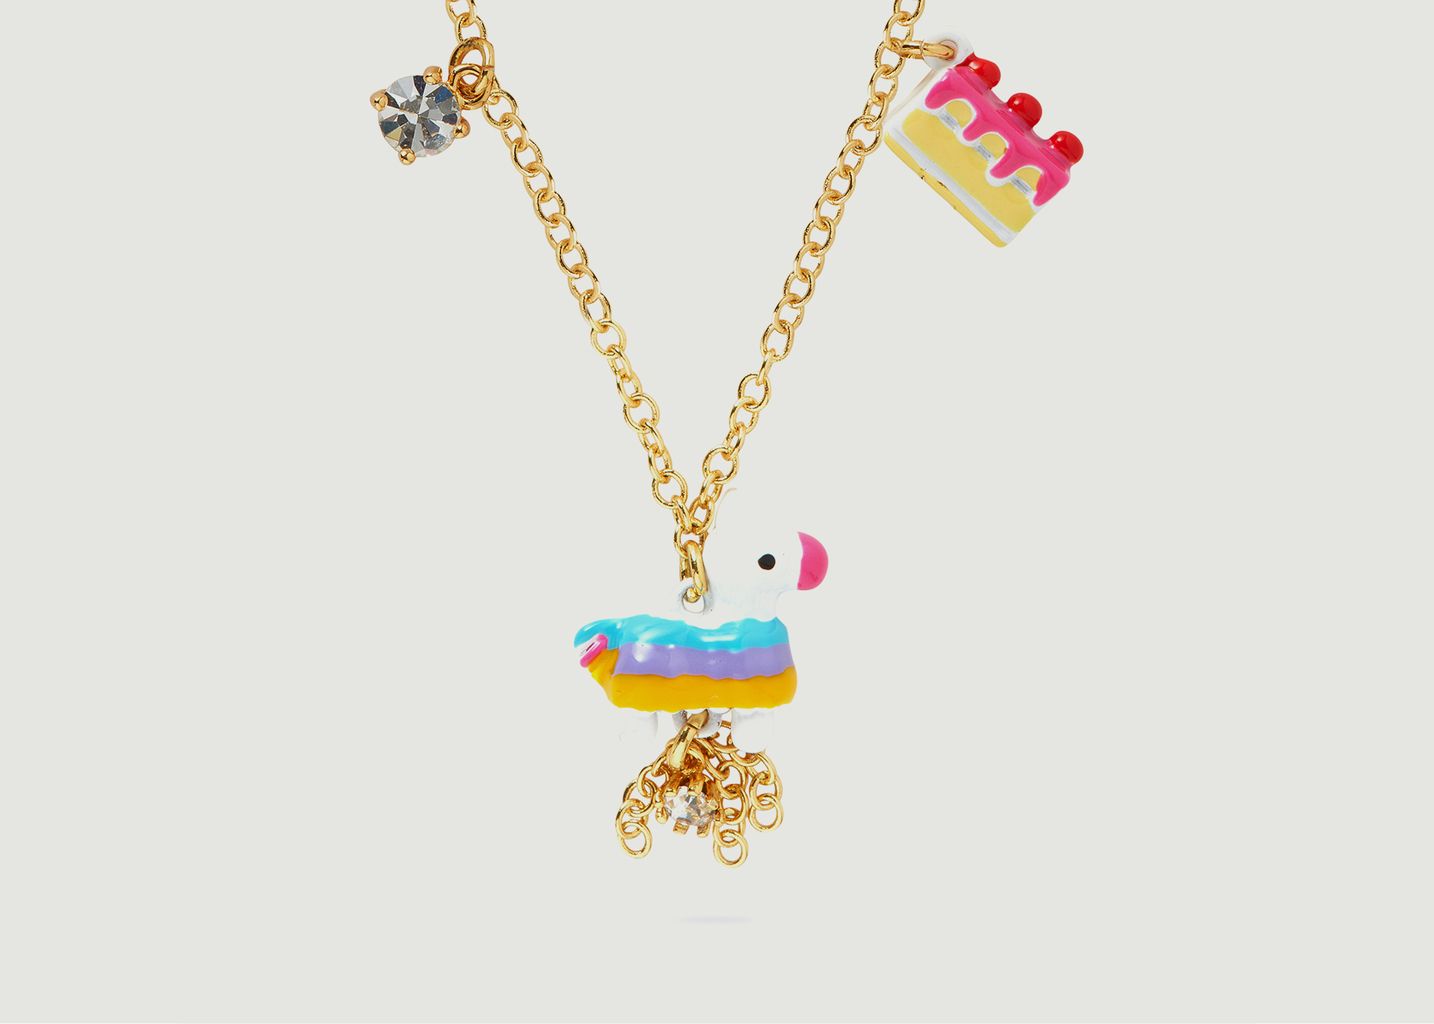 Necklace Pinata party pendant:  - N2